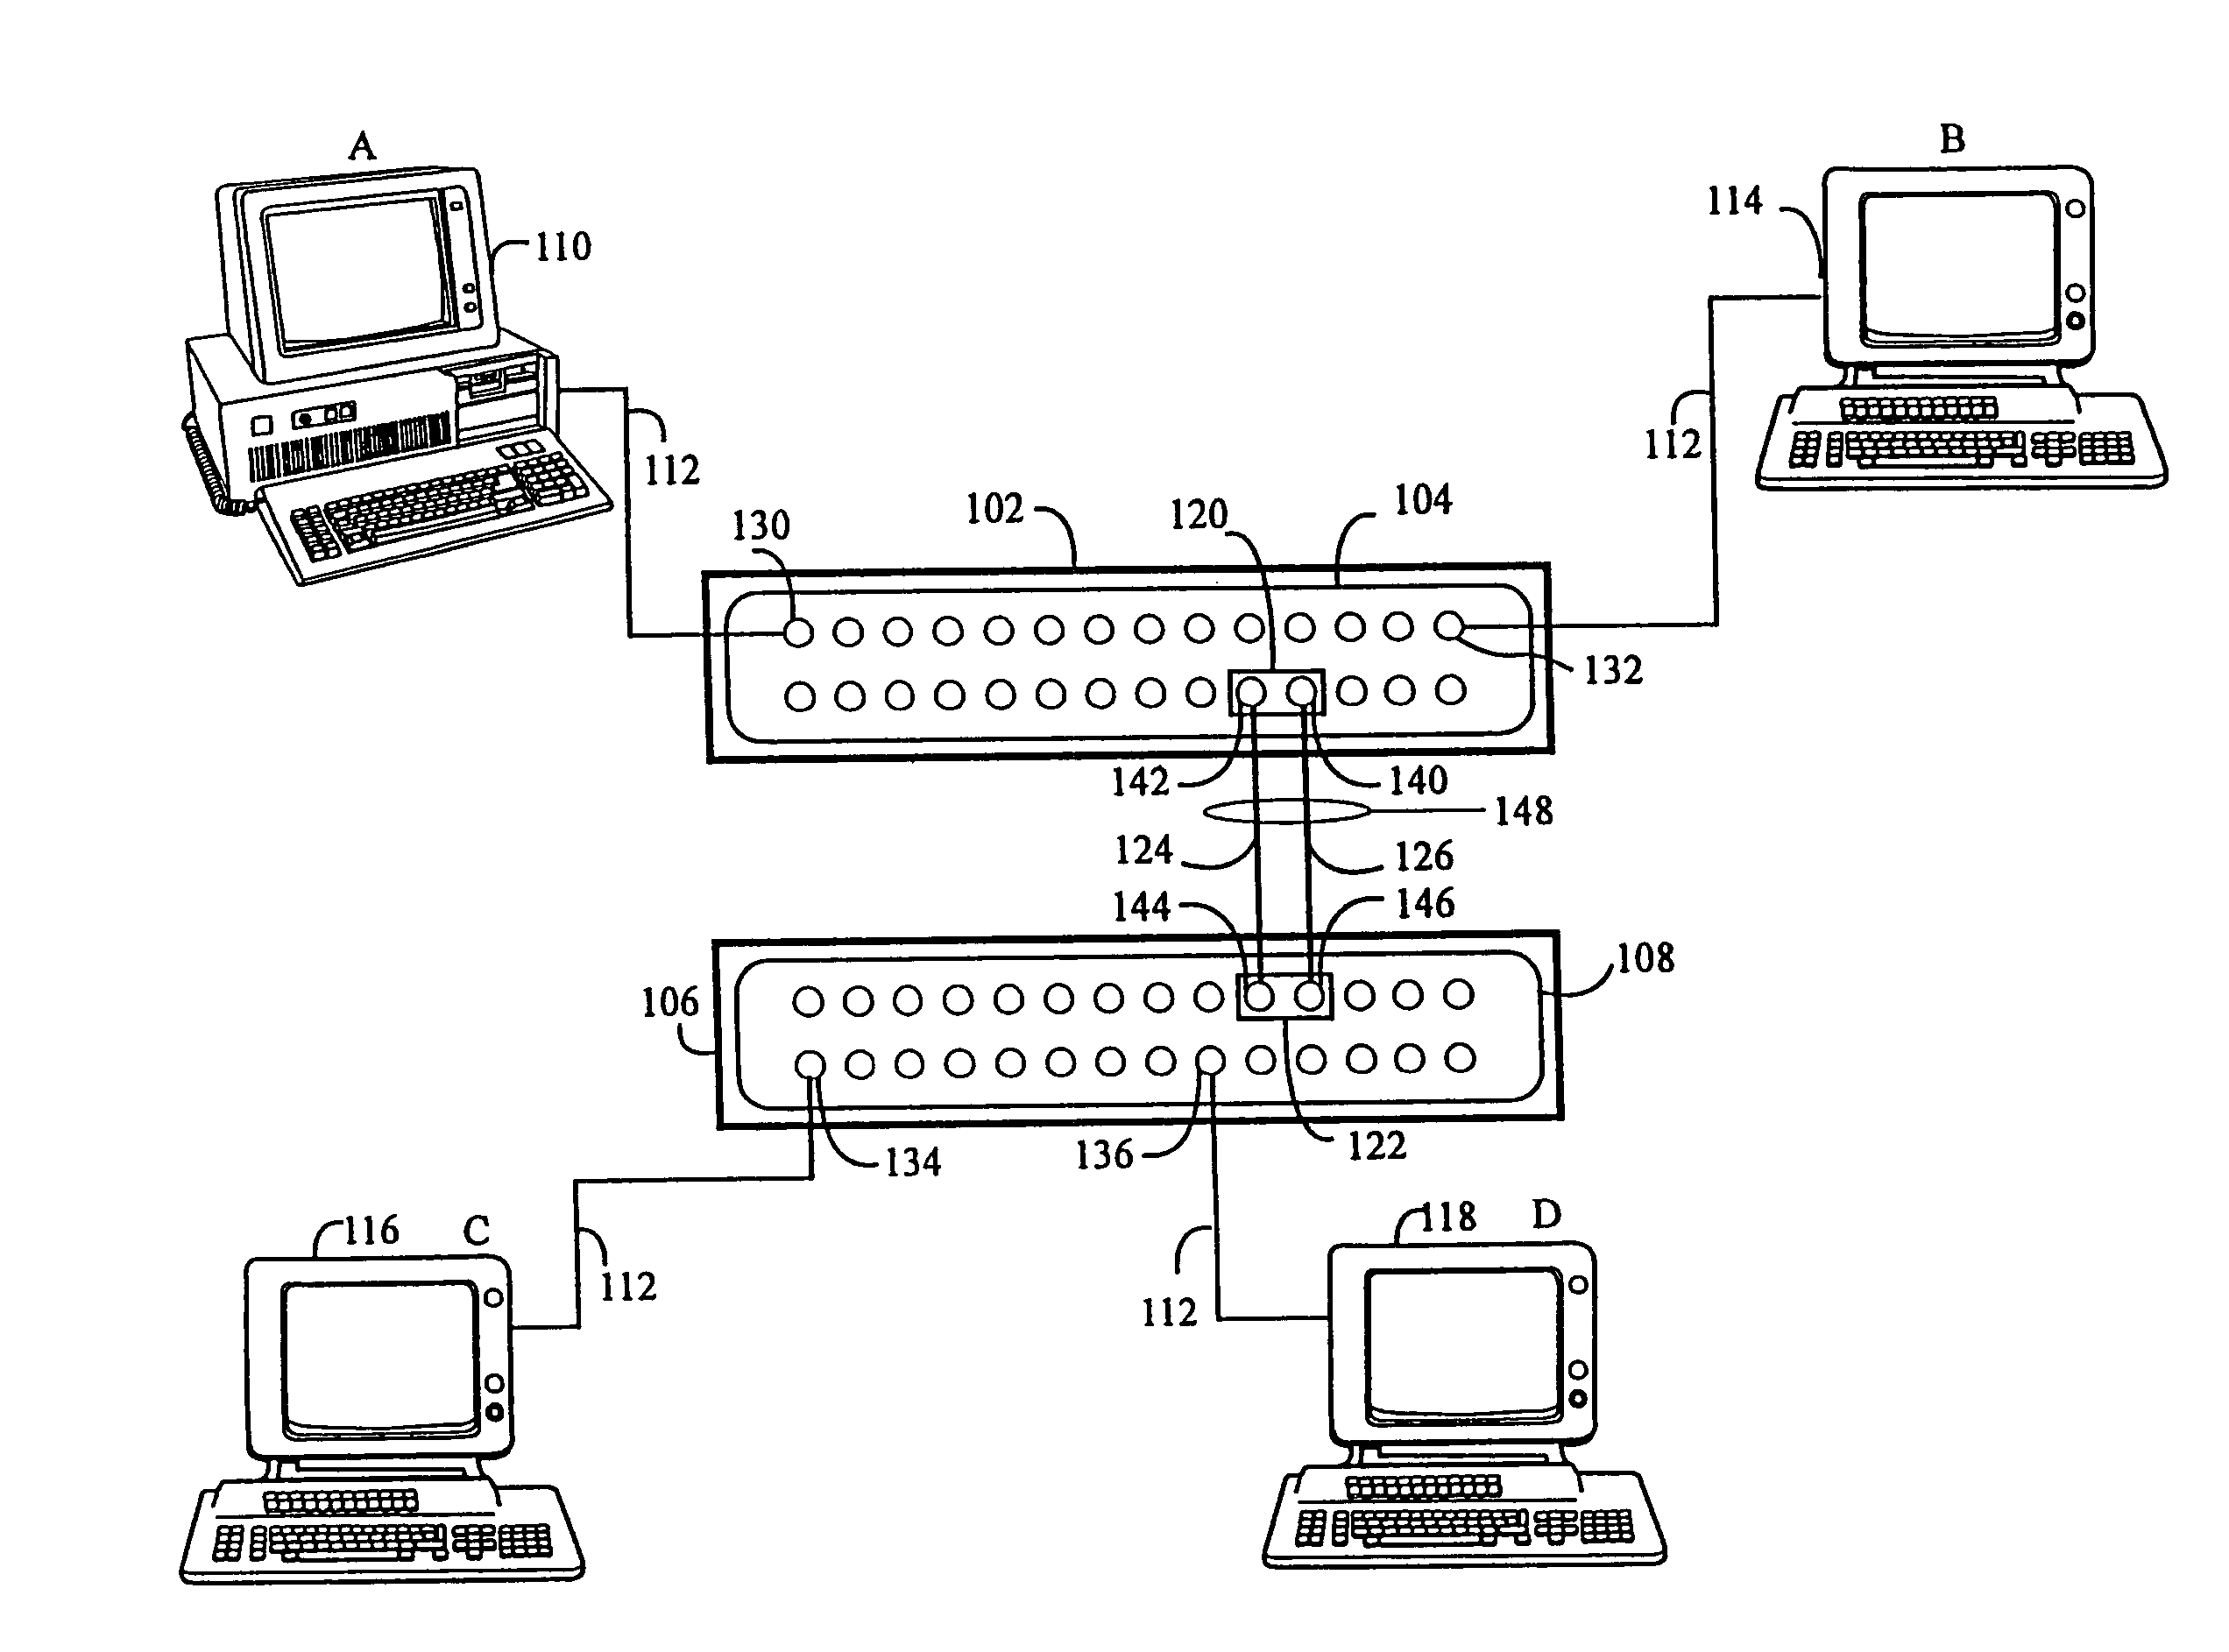 Network communication device including bonded ports for increased bandwidth